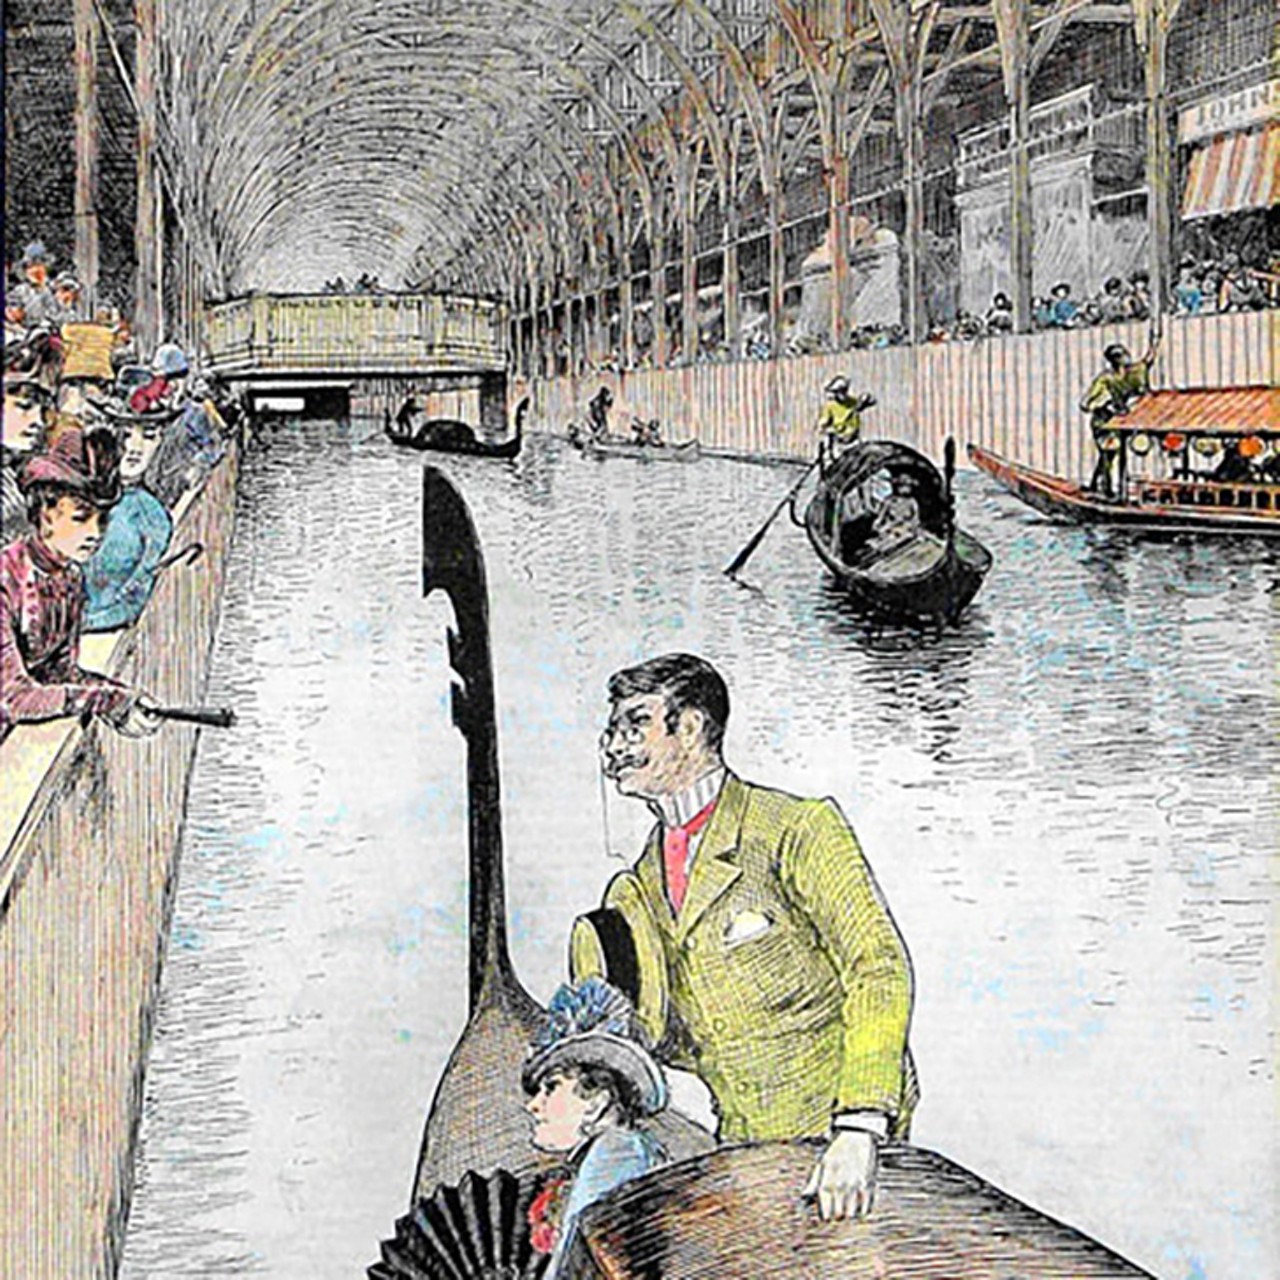 An illustration of gondolas in Machinery Hall. Daily performances were staged on ships on the covered waterway, as were canal races and gondola rides.